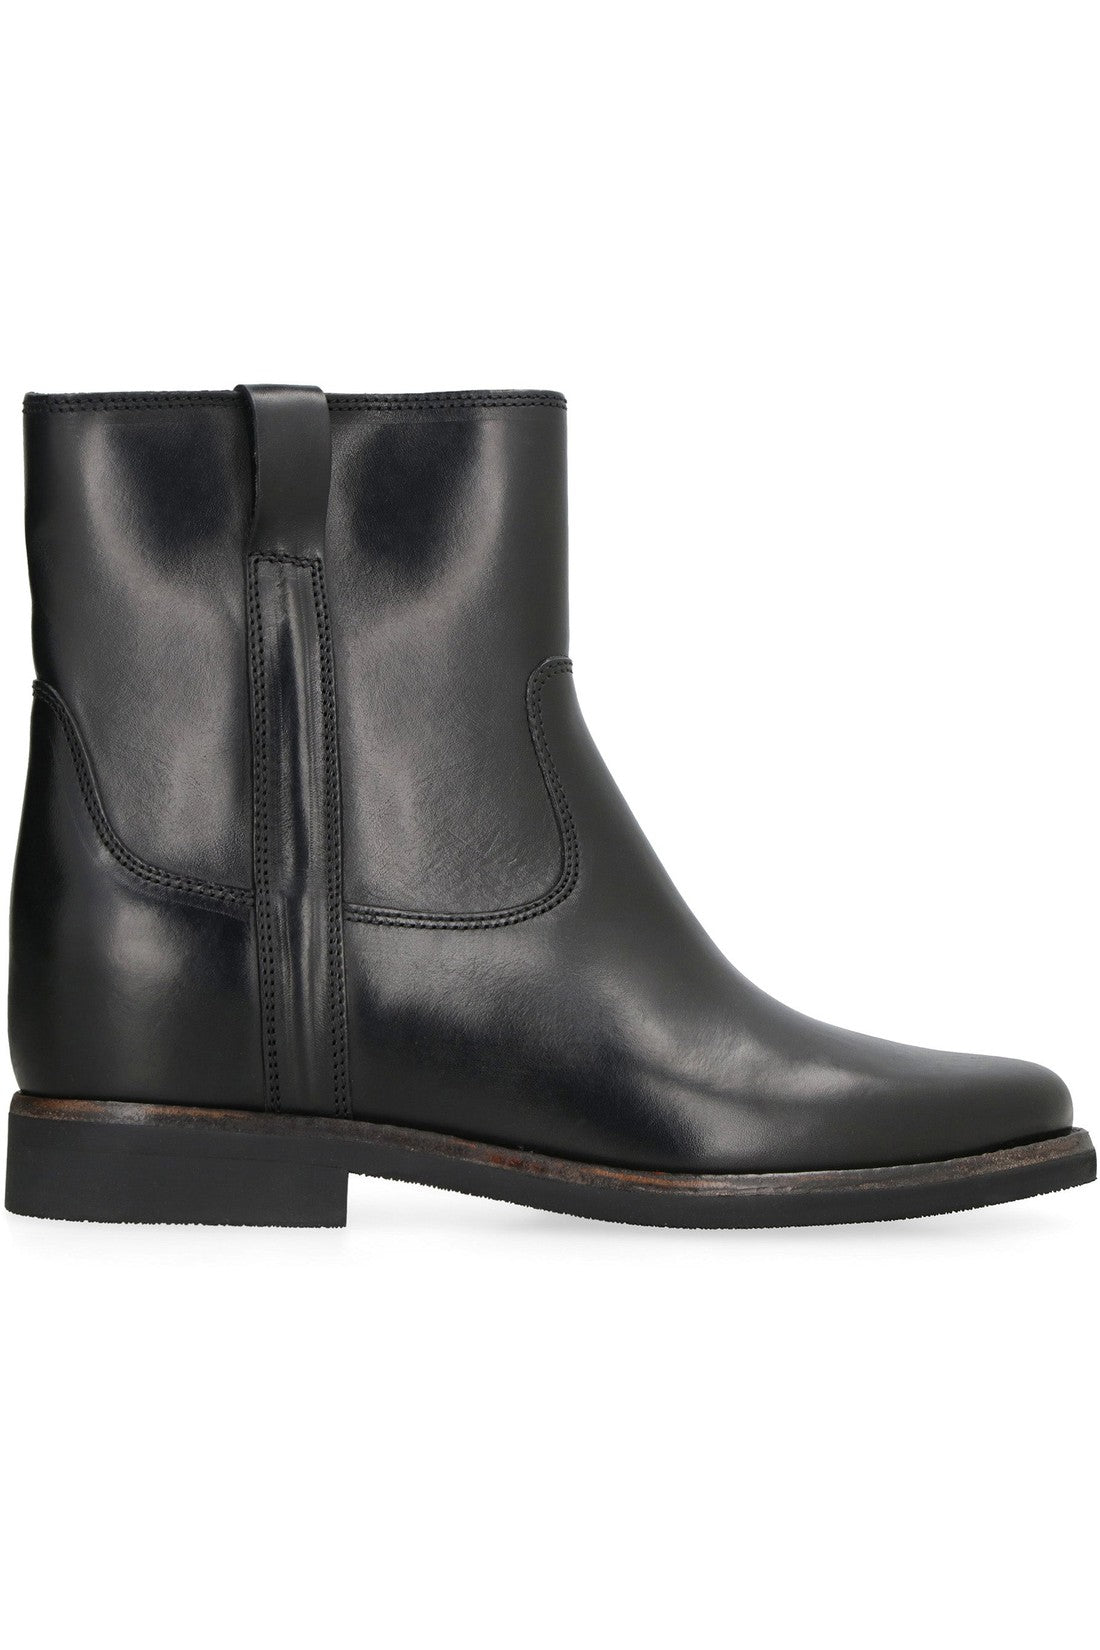 Isabel Marant-OUTLET-SALE-Susee leather ankle boots-ARCHIVIST